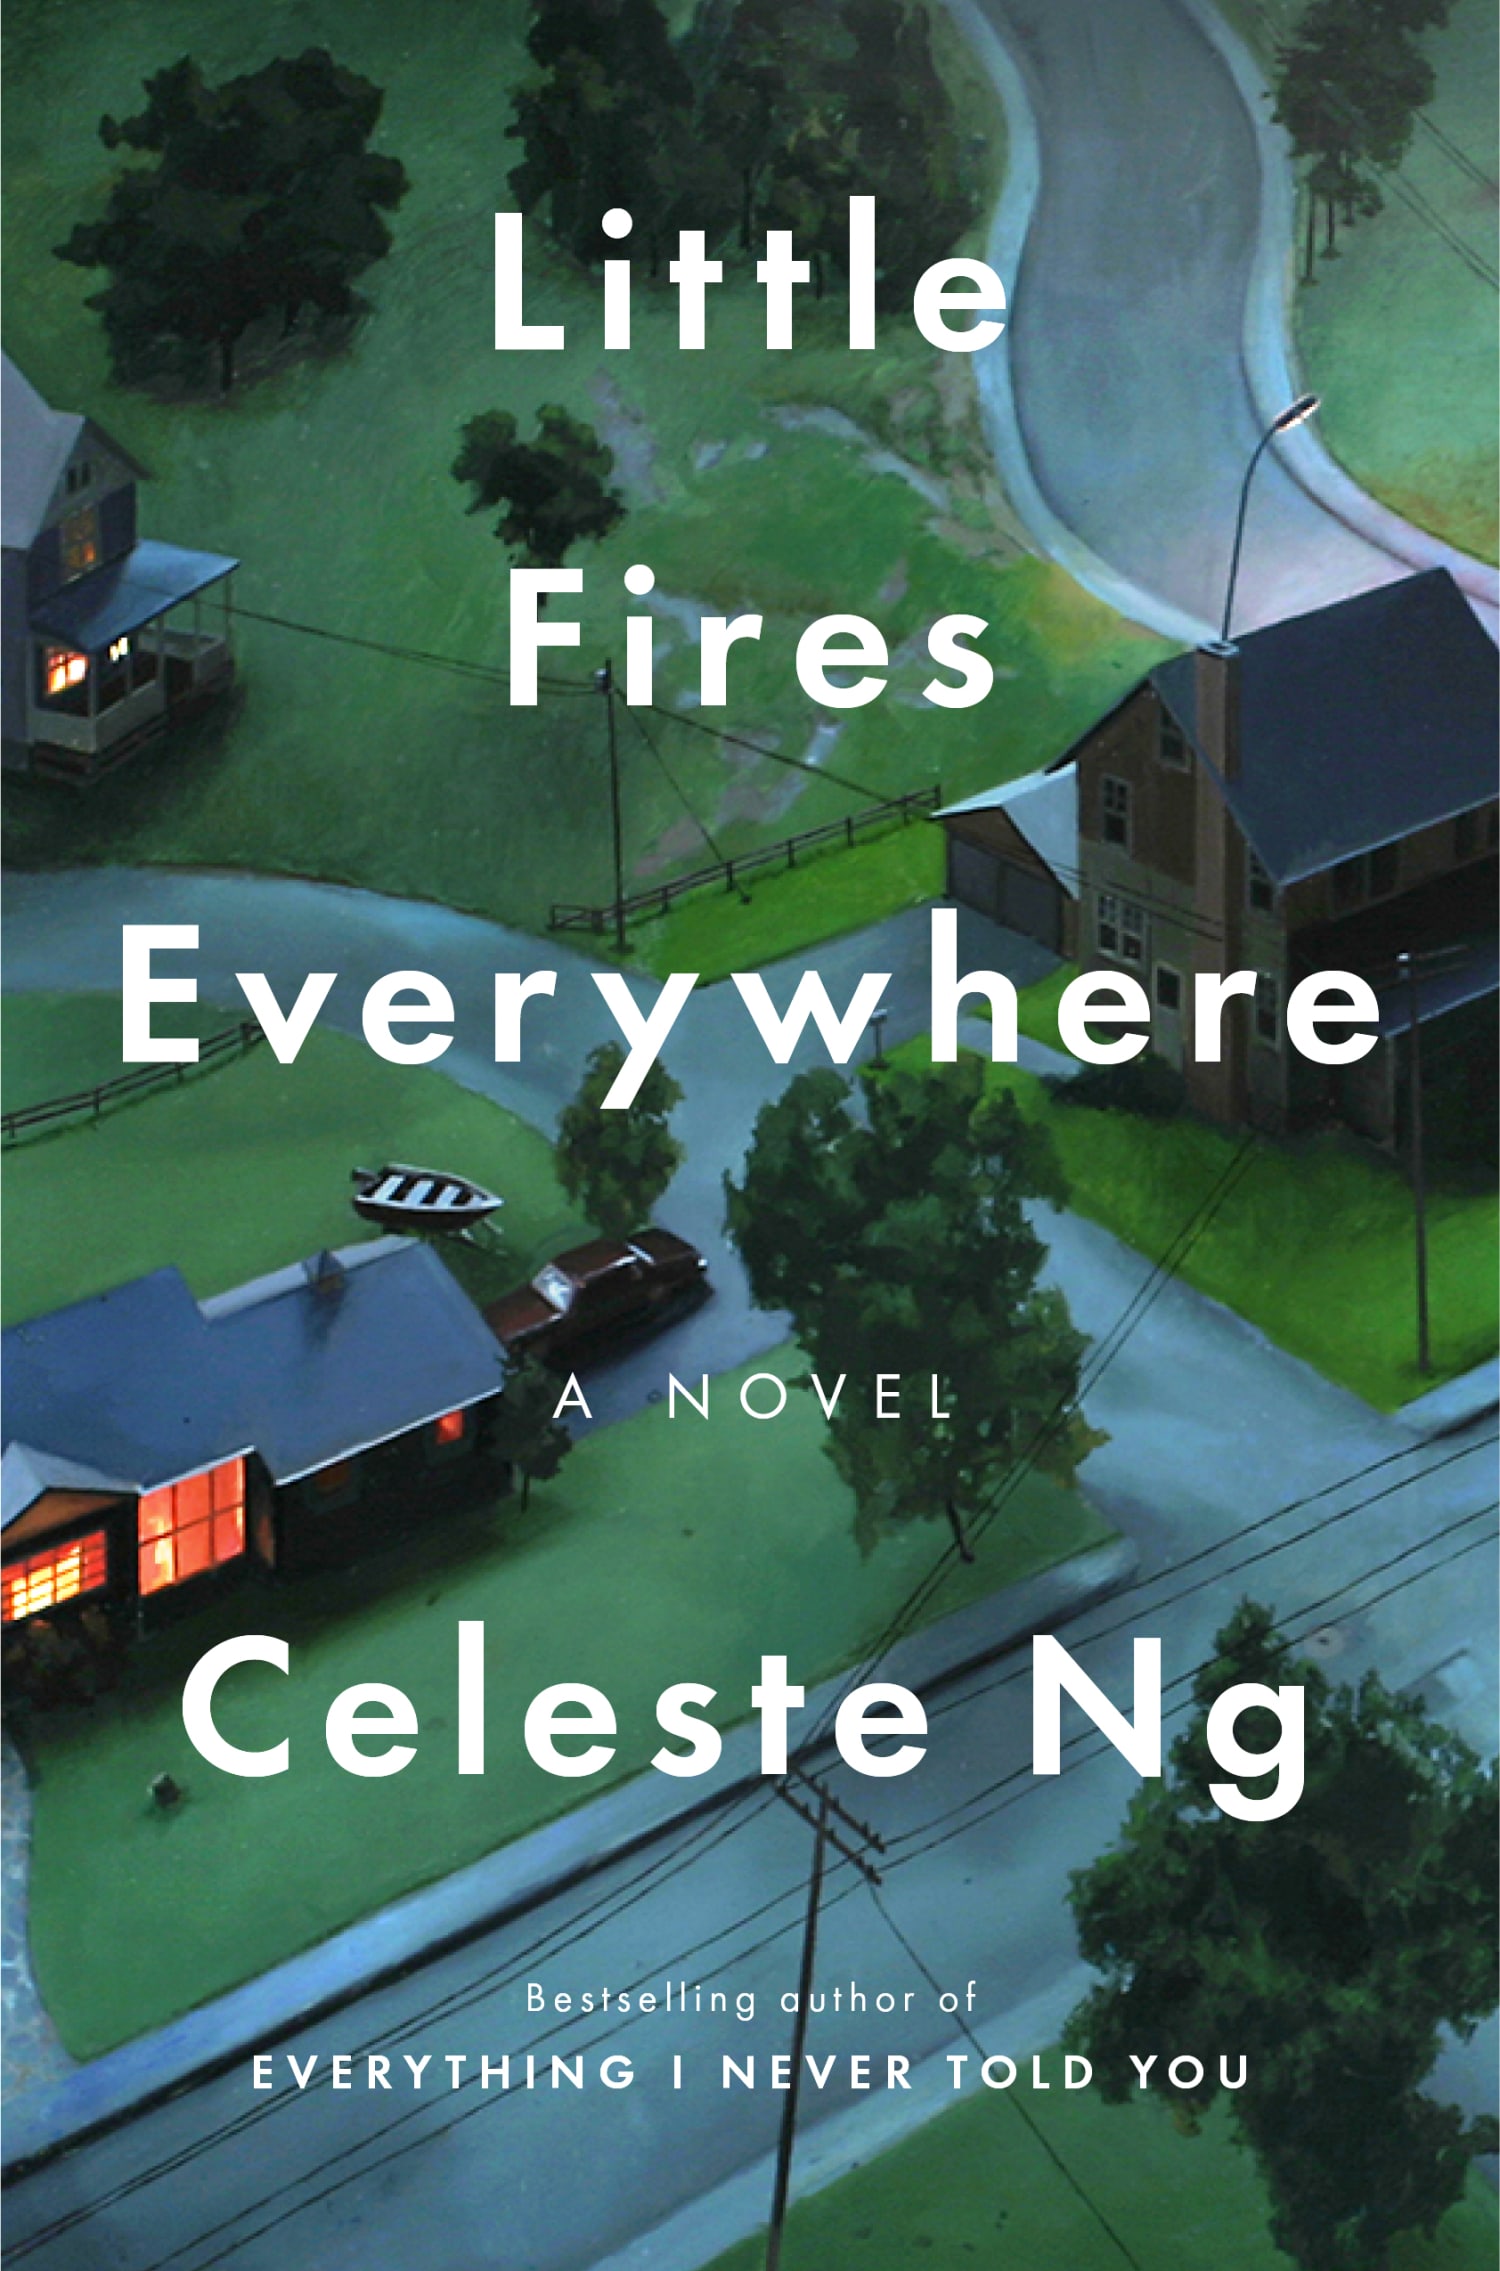 In Little Fires Everywhere Author Celeste Ng Explores Asianness And Family